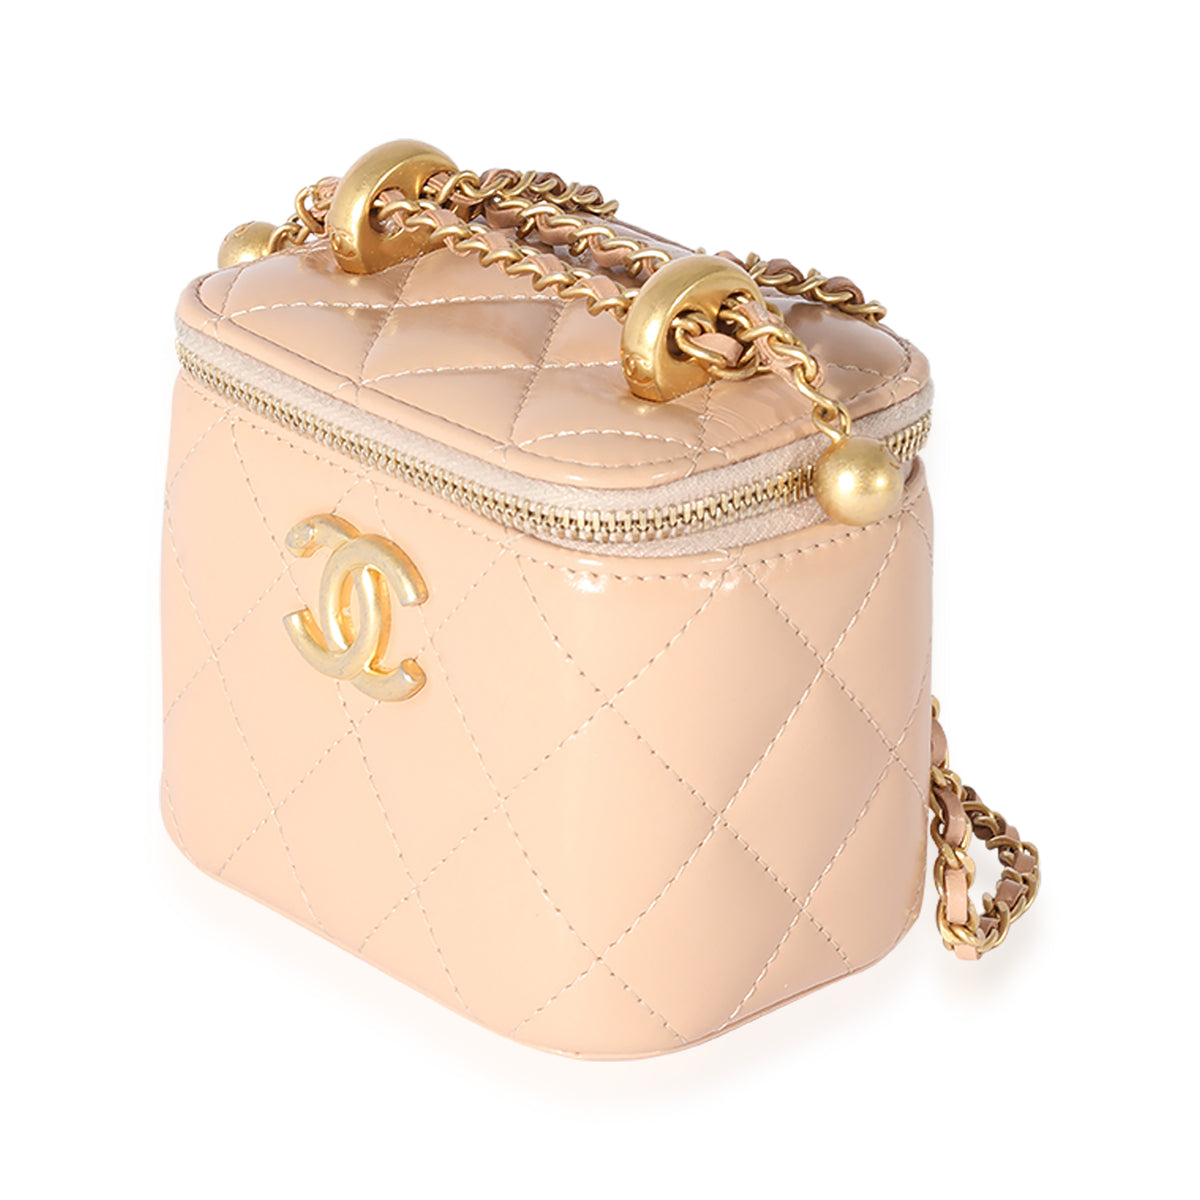 Chanel Pink Quilted Lambskin Pearl Crush Mini Vanity Case, myGemma